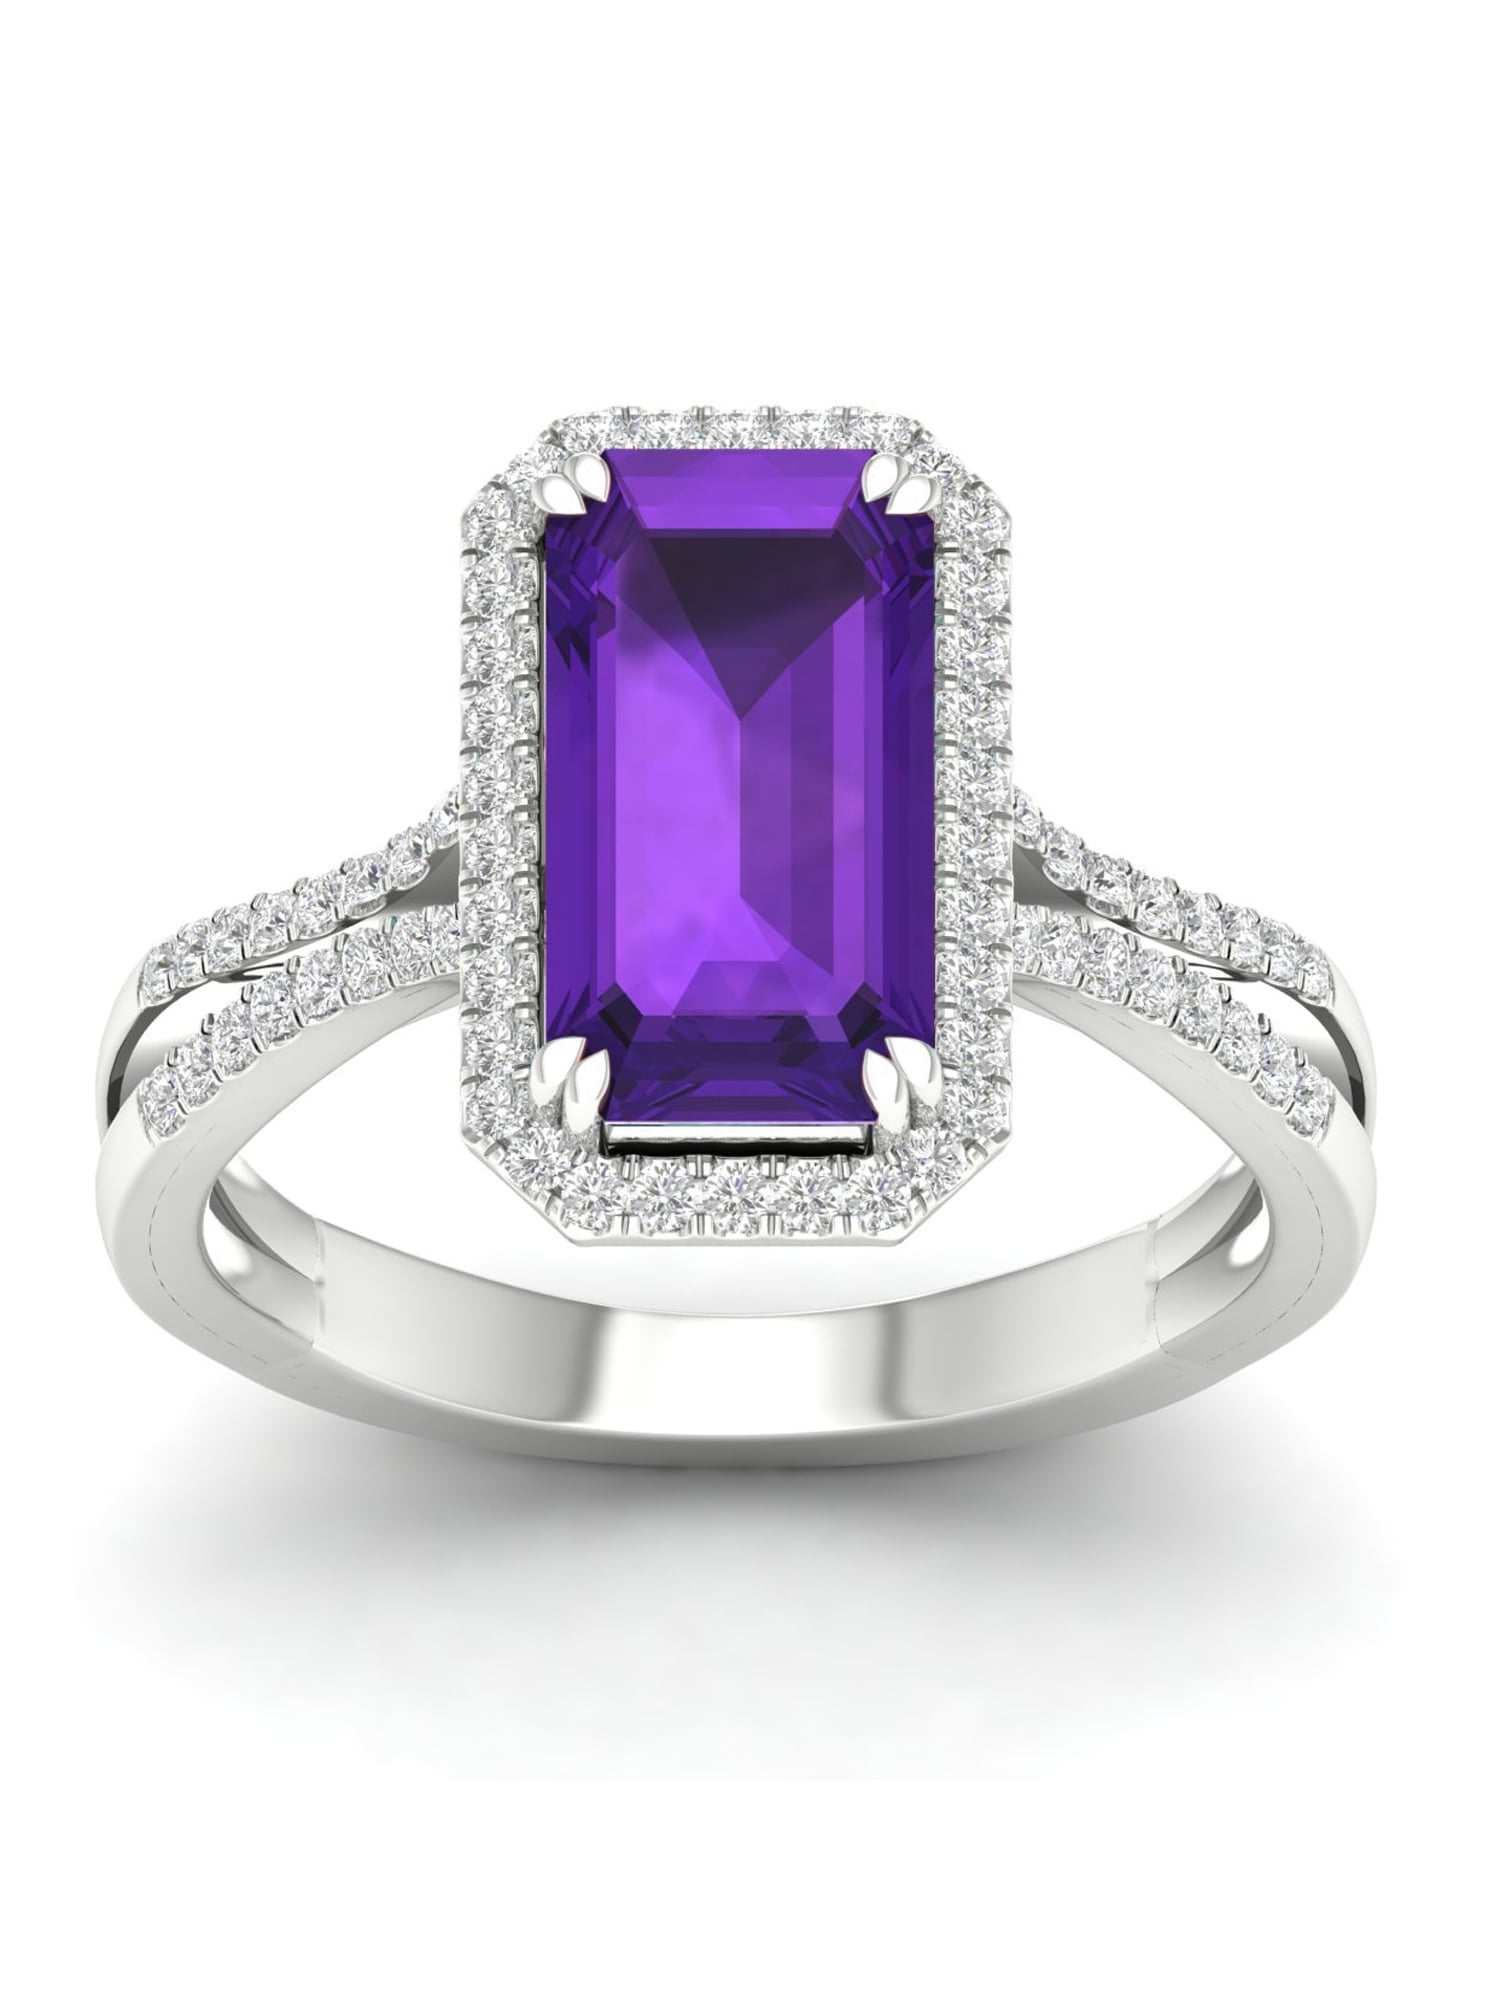 10k White Gold Oval Amethyst and Diamond Ring 1/10 TDW 